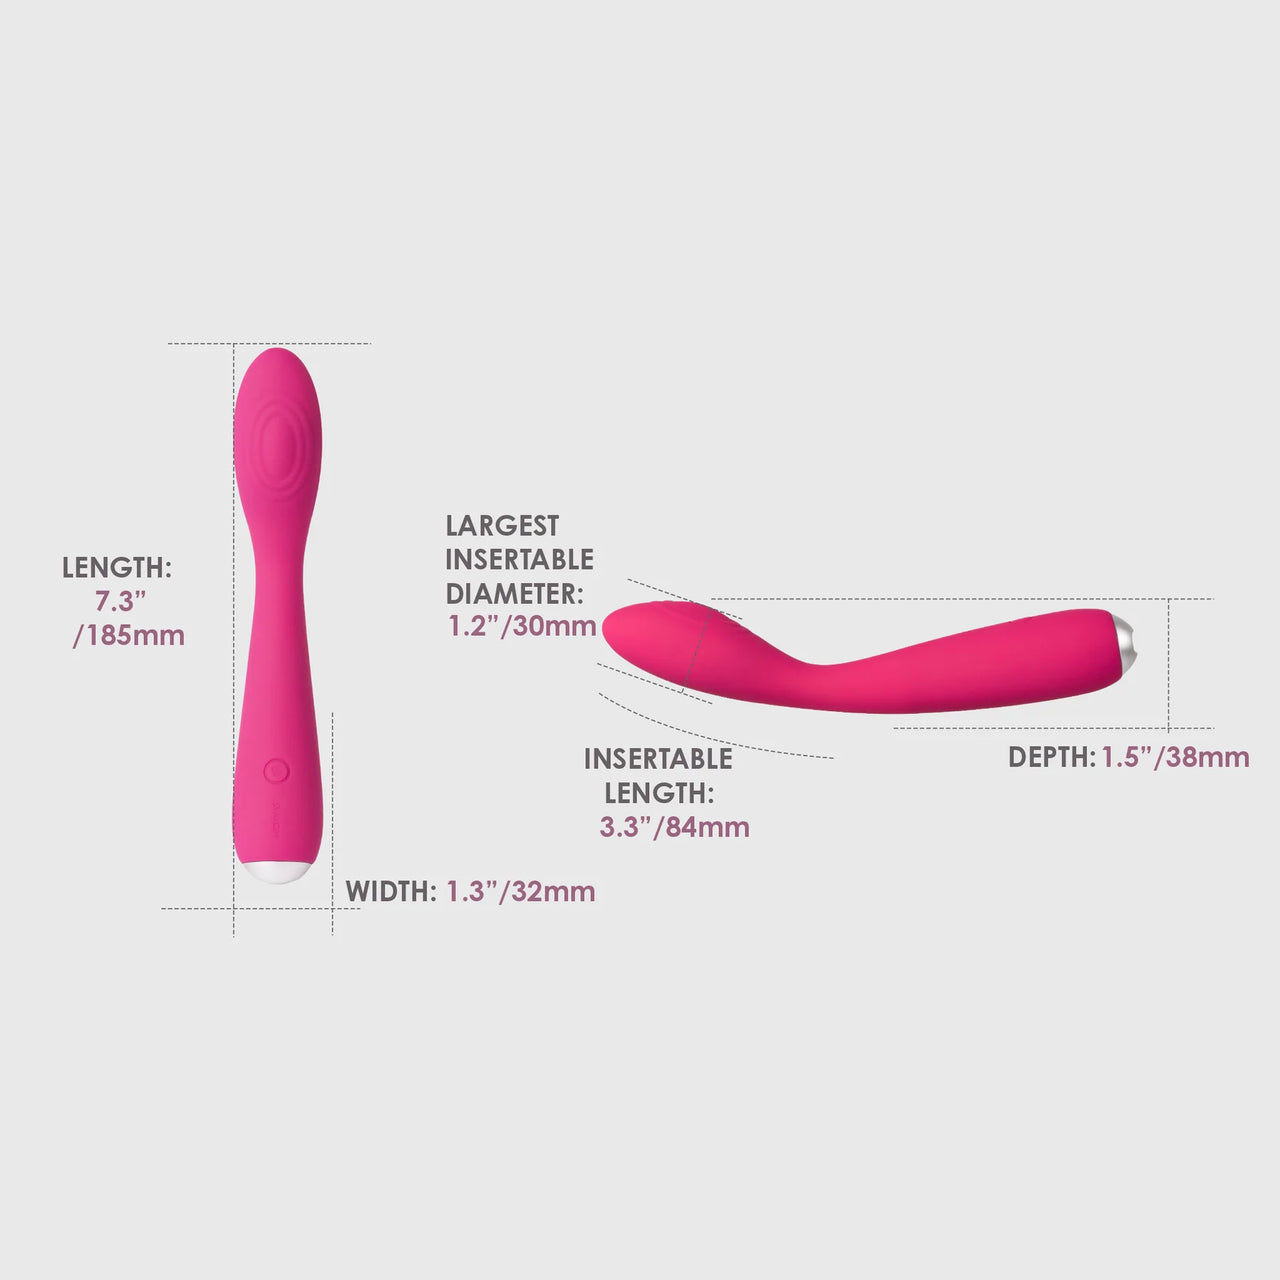 a diagram showing the size of a pink object